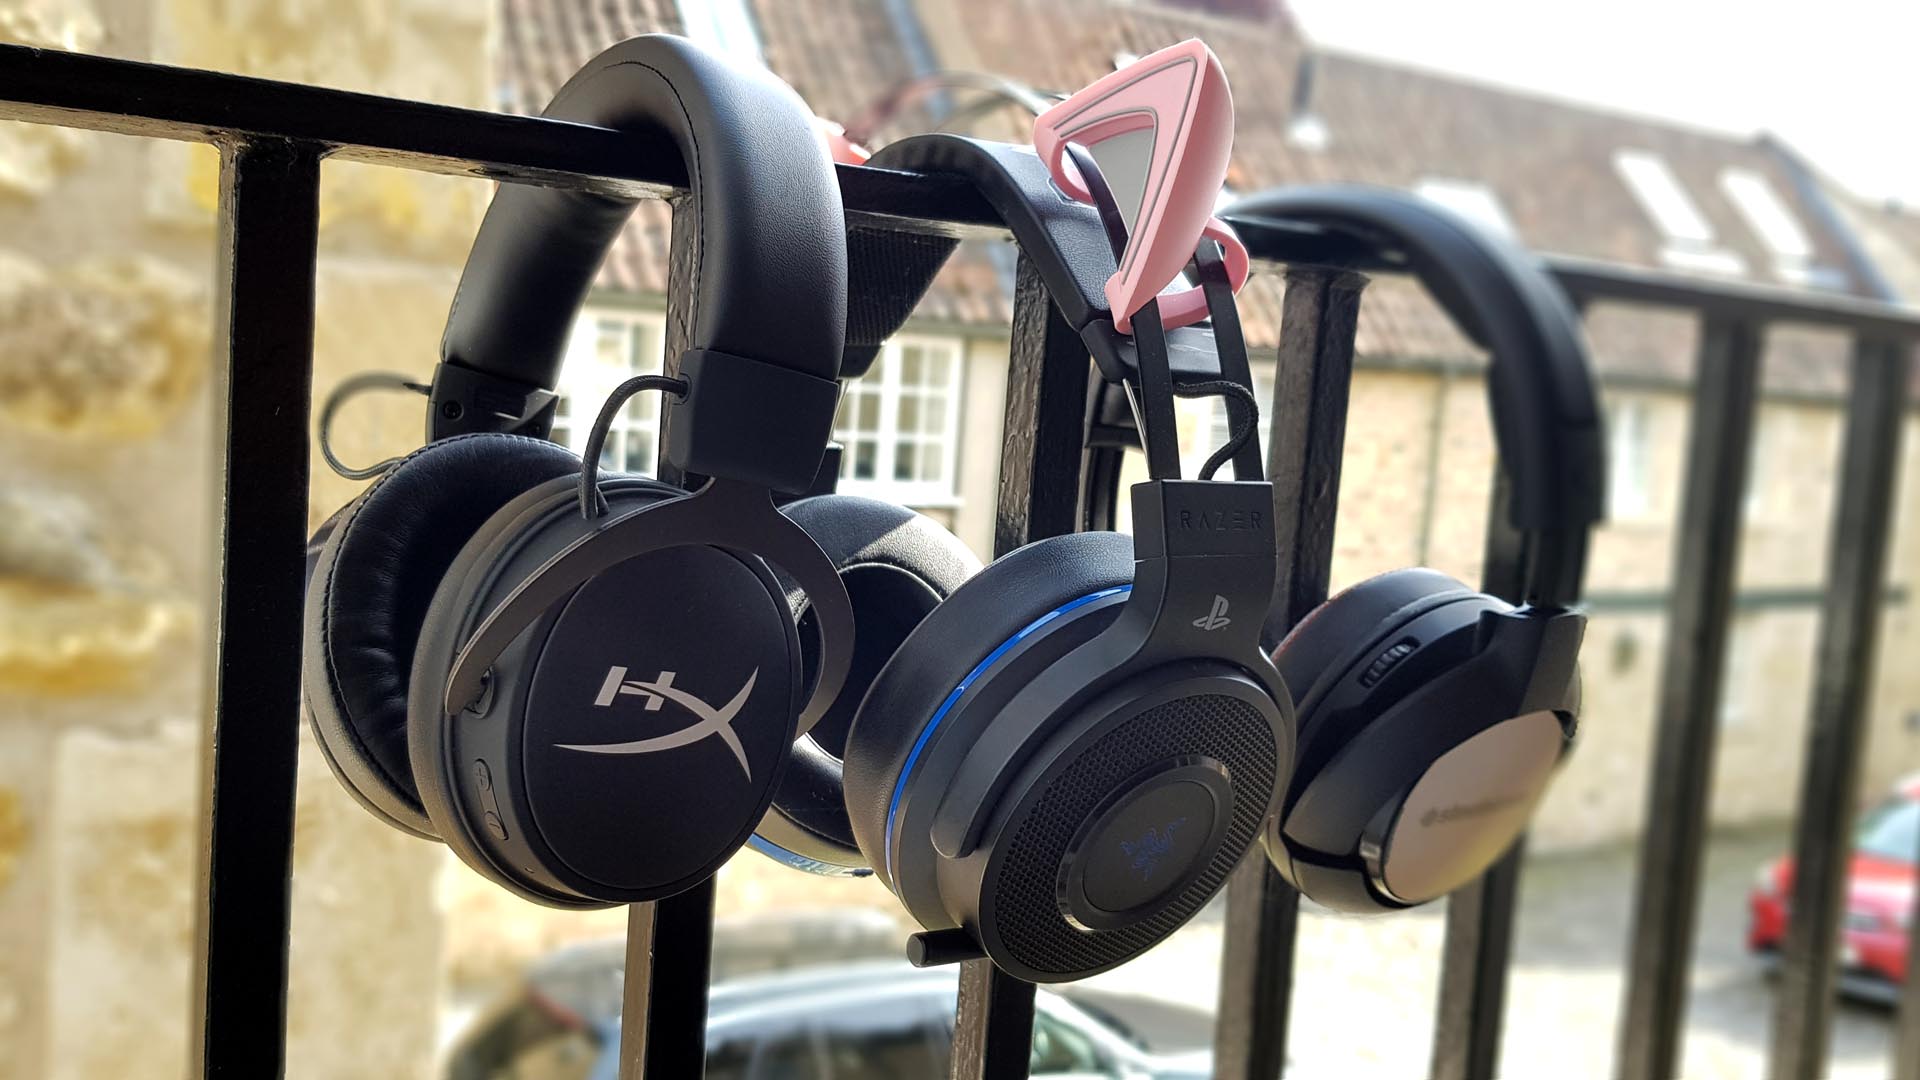 The best gaming headsets featuring HyperX, Razer, SteelSeries, and more